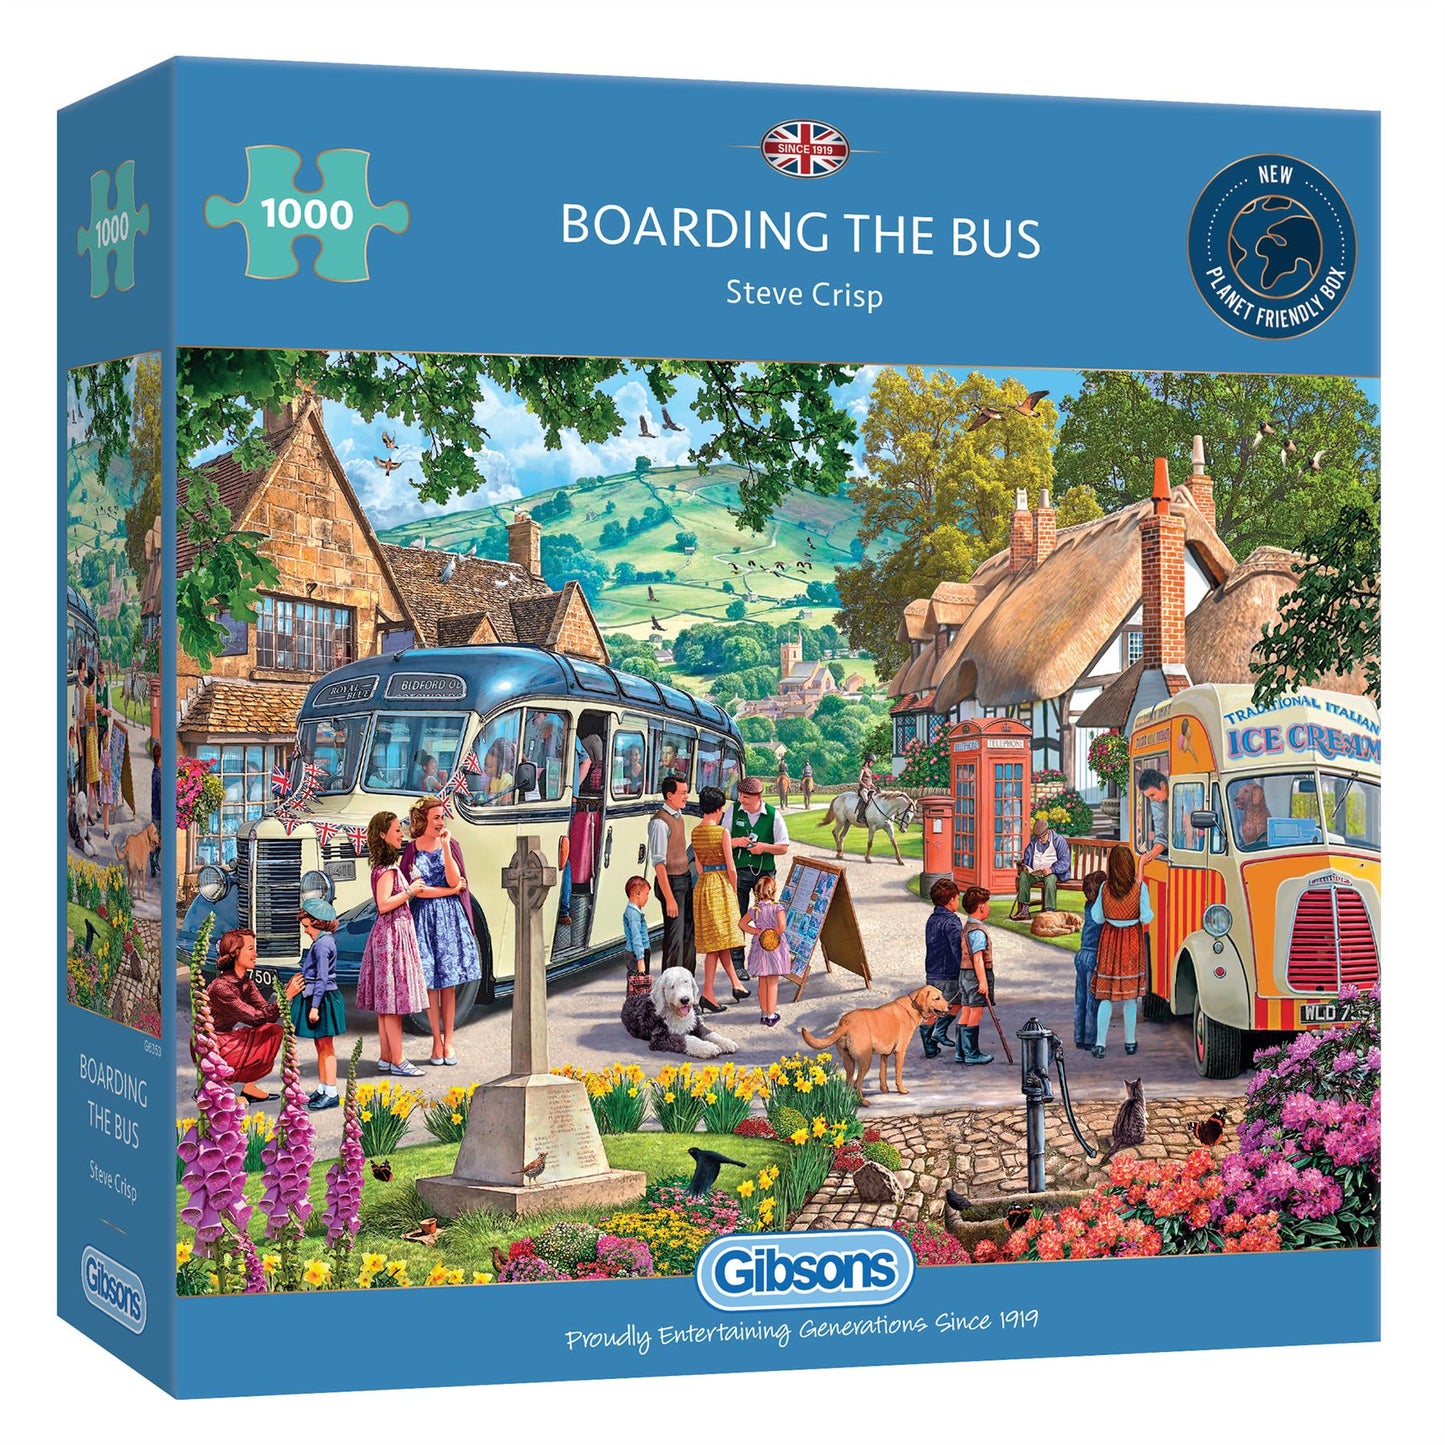 Boarding The Bus 1000 Piece Jigsaw Puzzle